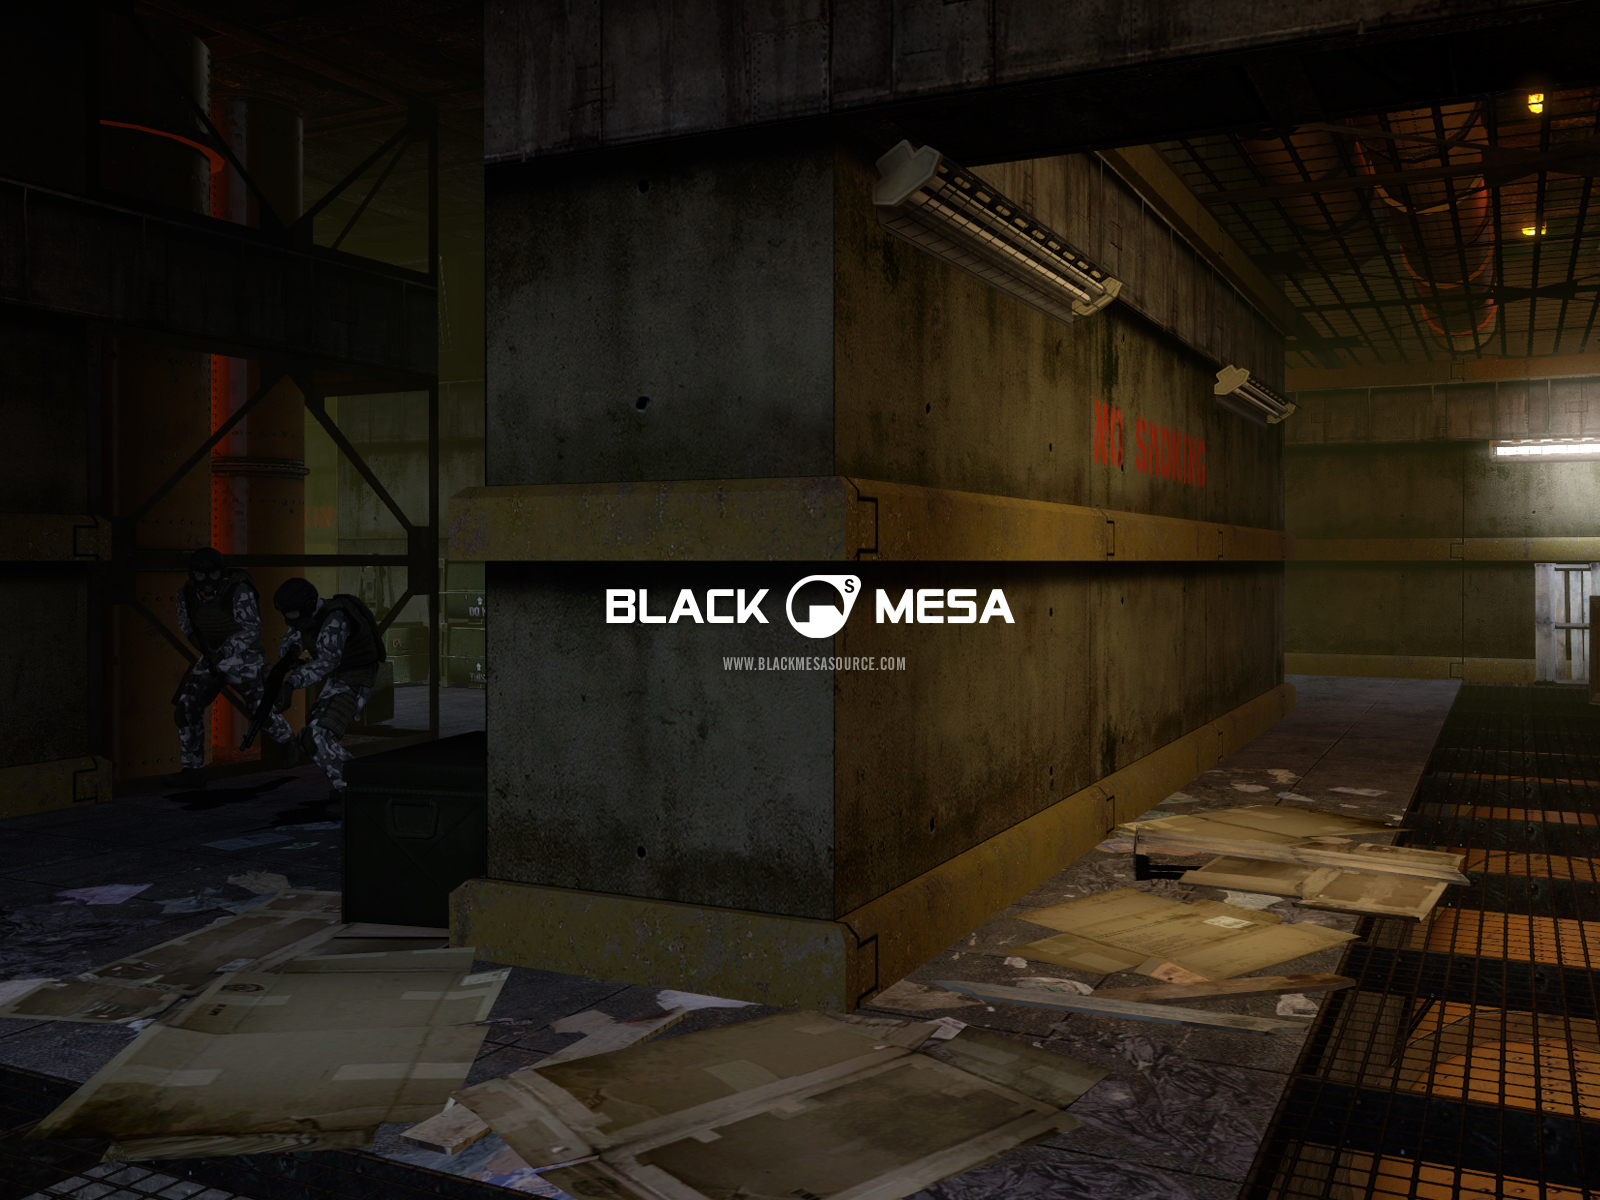 Black Mesa Source Warehouse   Action Games Wallpaper Image featuring